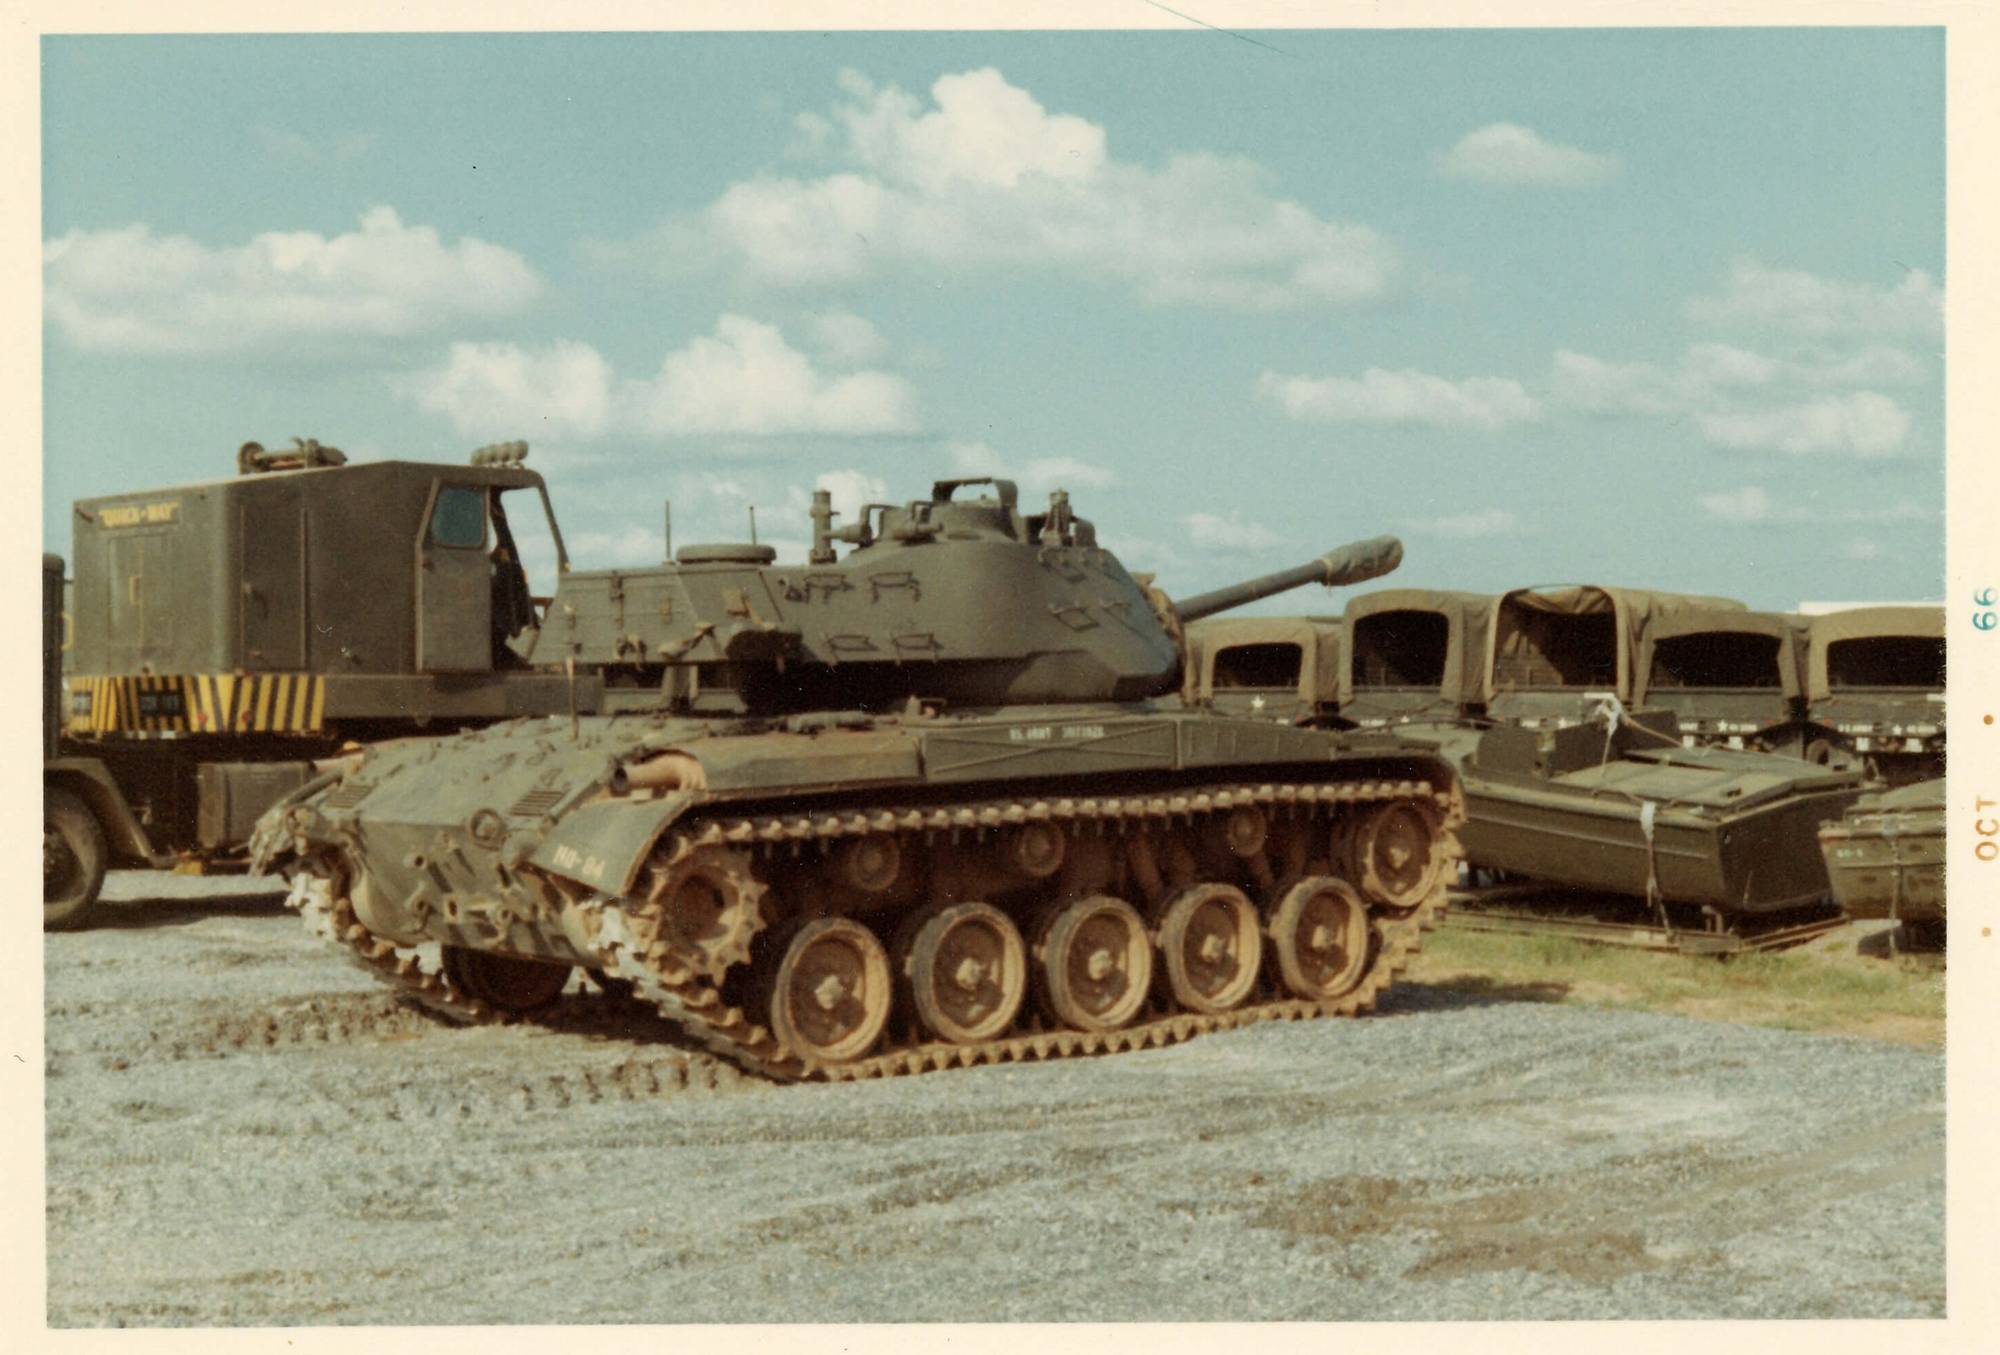 A tank. Margins indicate photo is from October 1966.